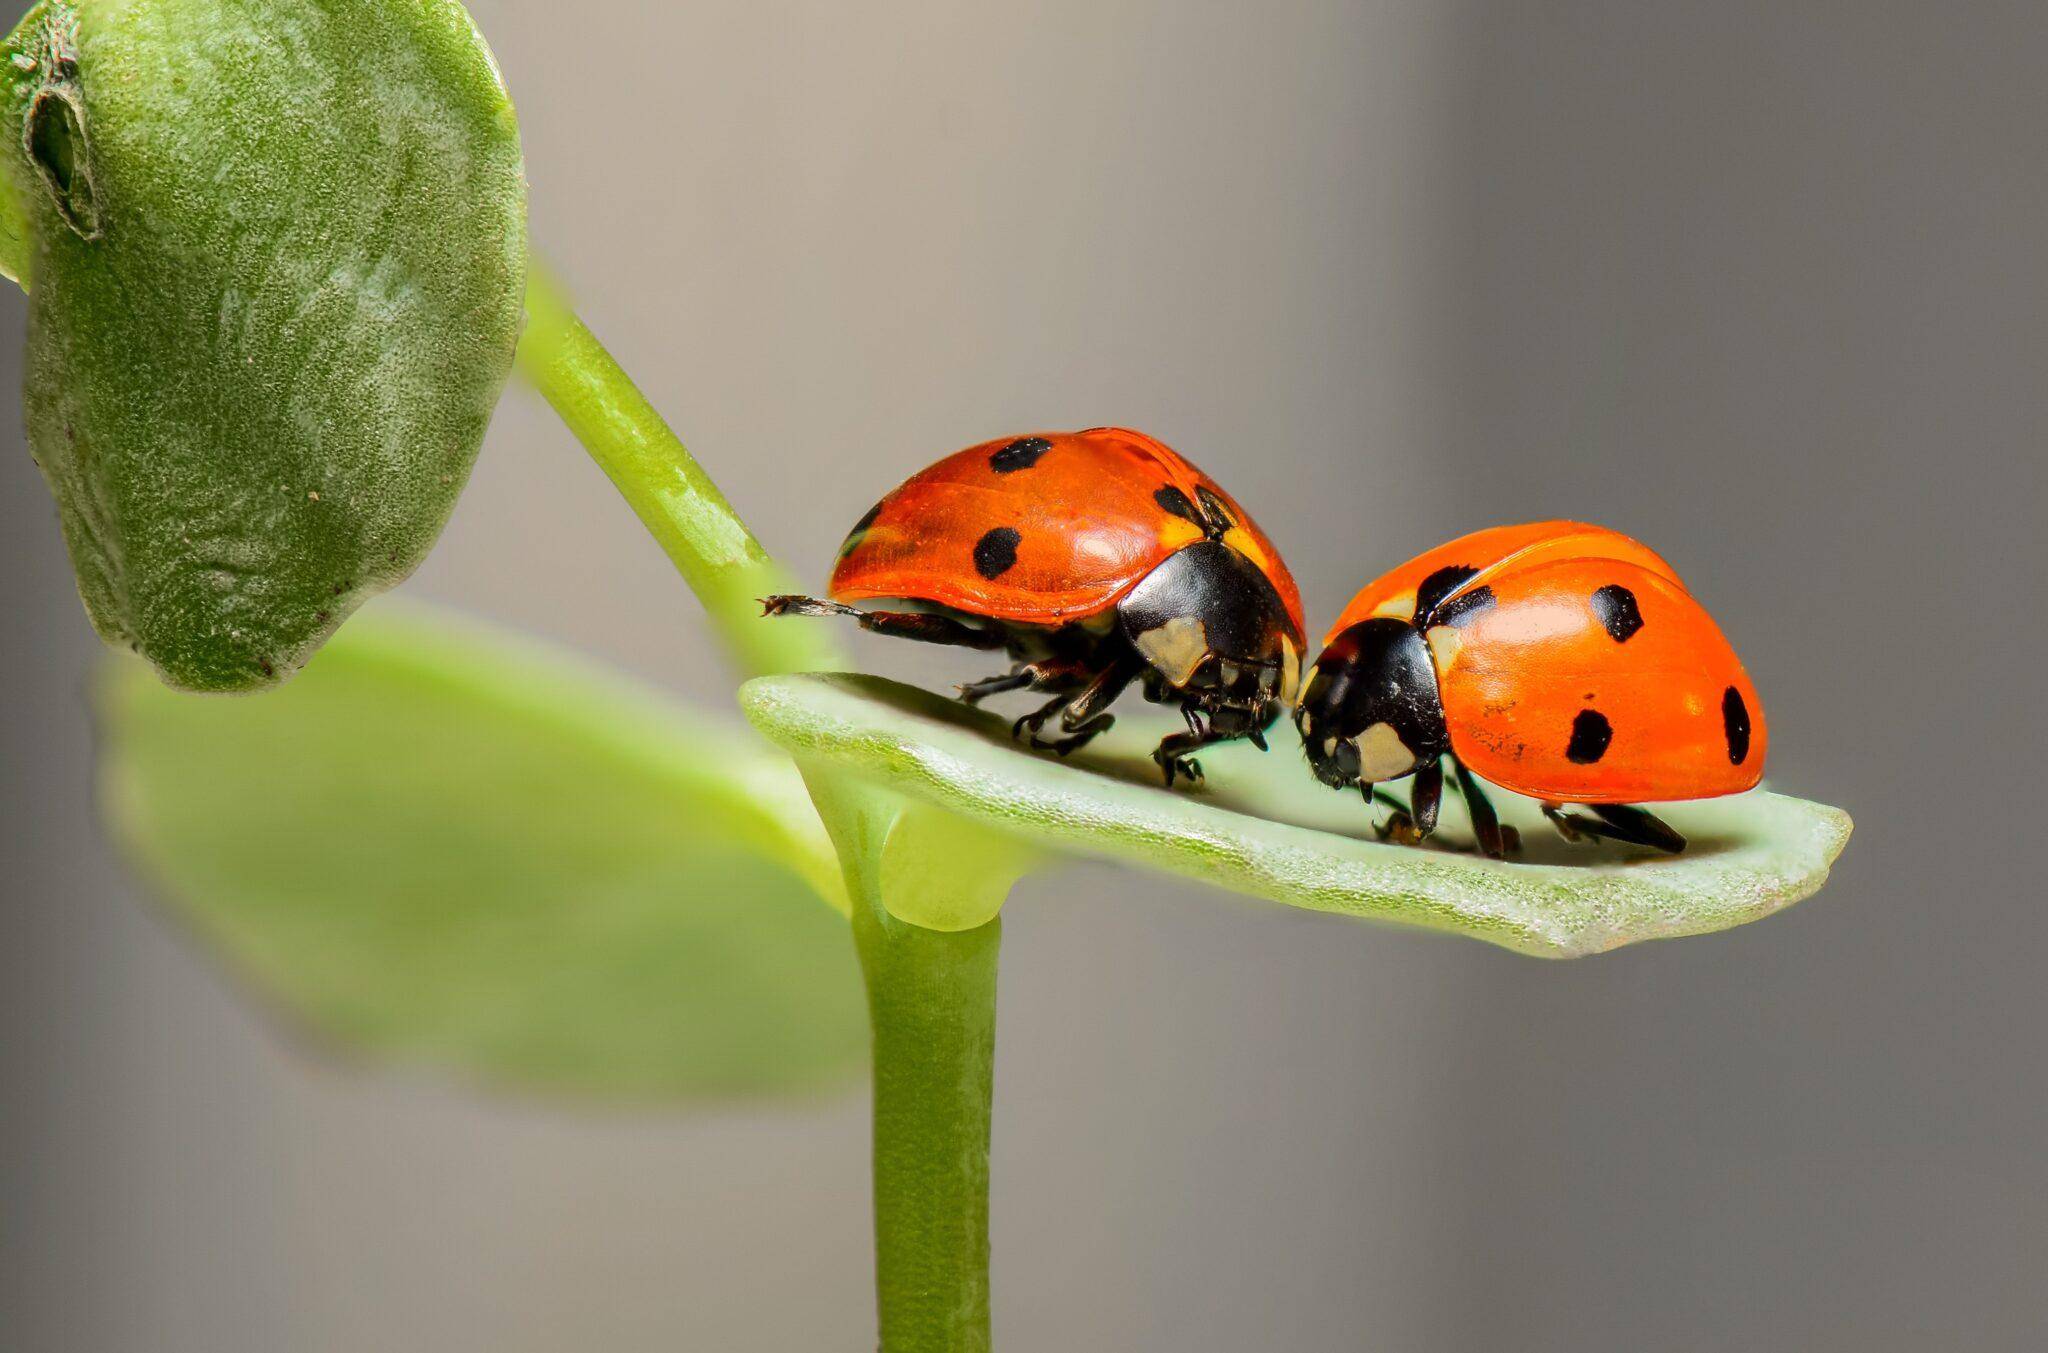 How To Get Rid Of Ladybugs – Best 10 Tips That Work